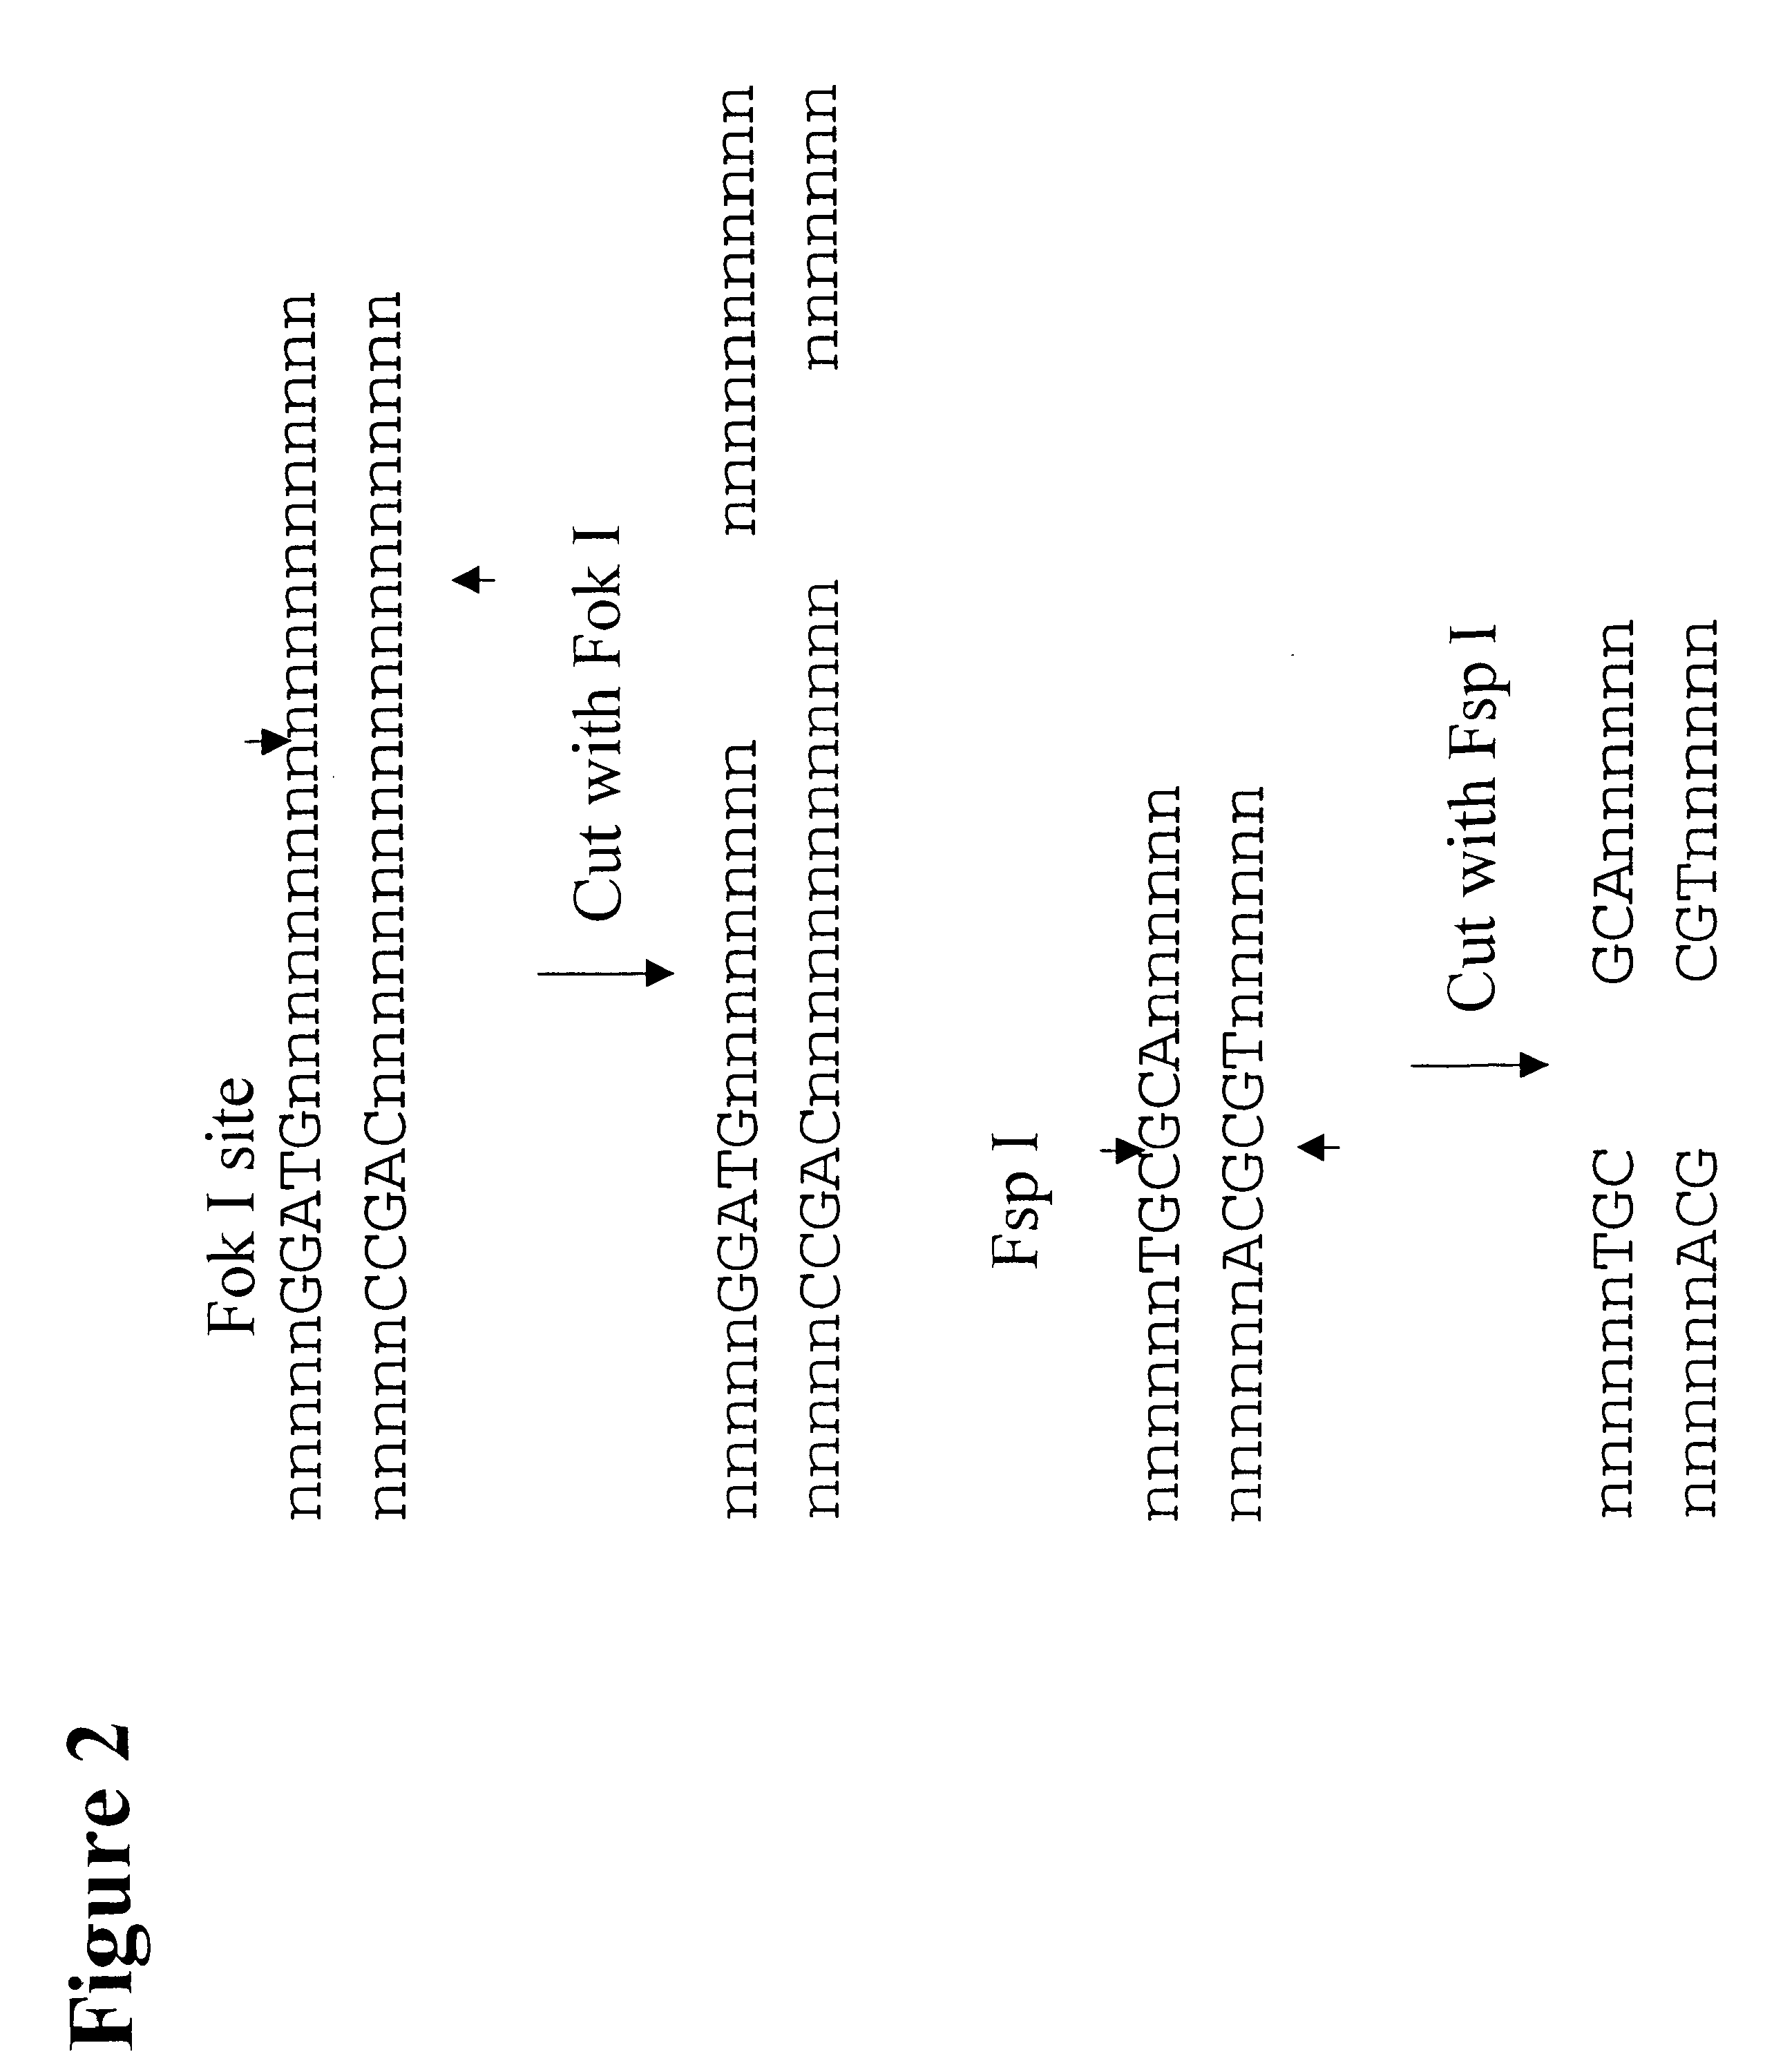 Methods for genetic analysis of DNA using biased amplification of polymorphic sites